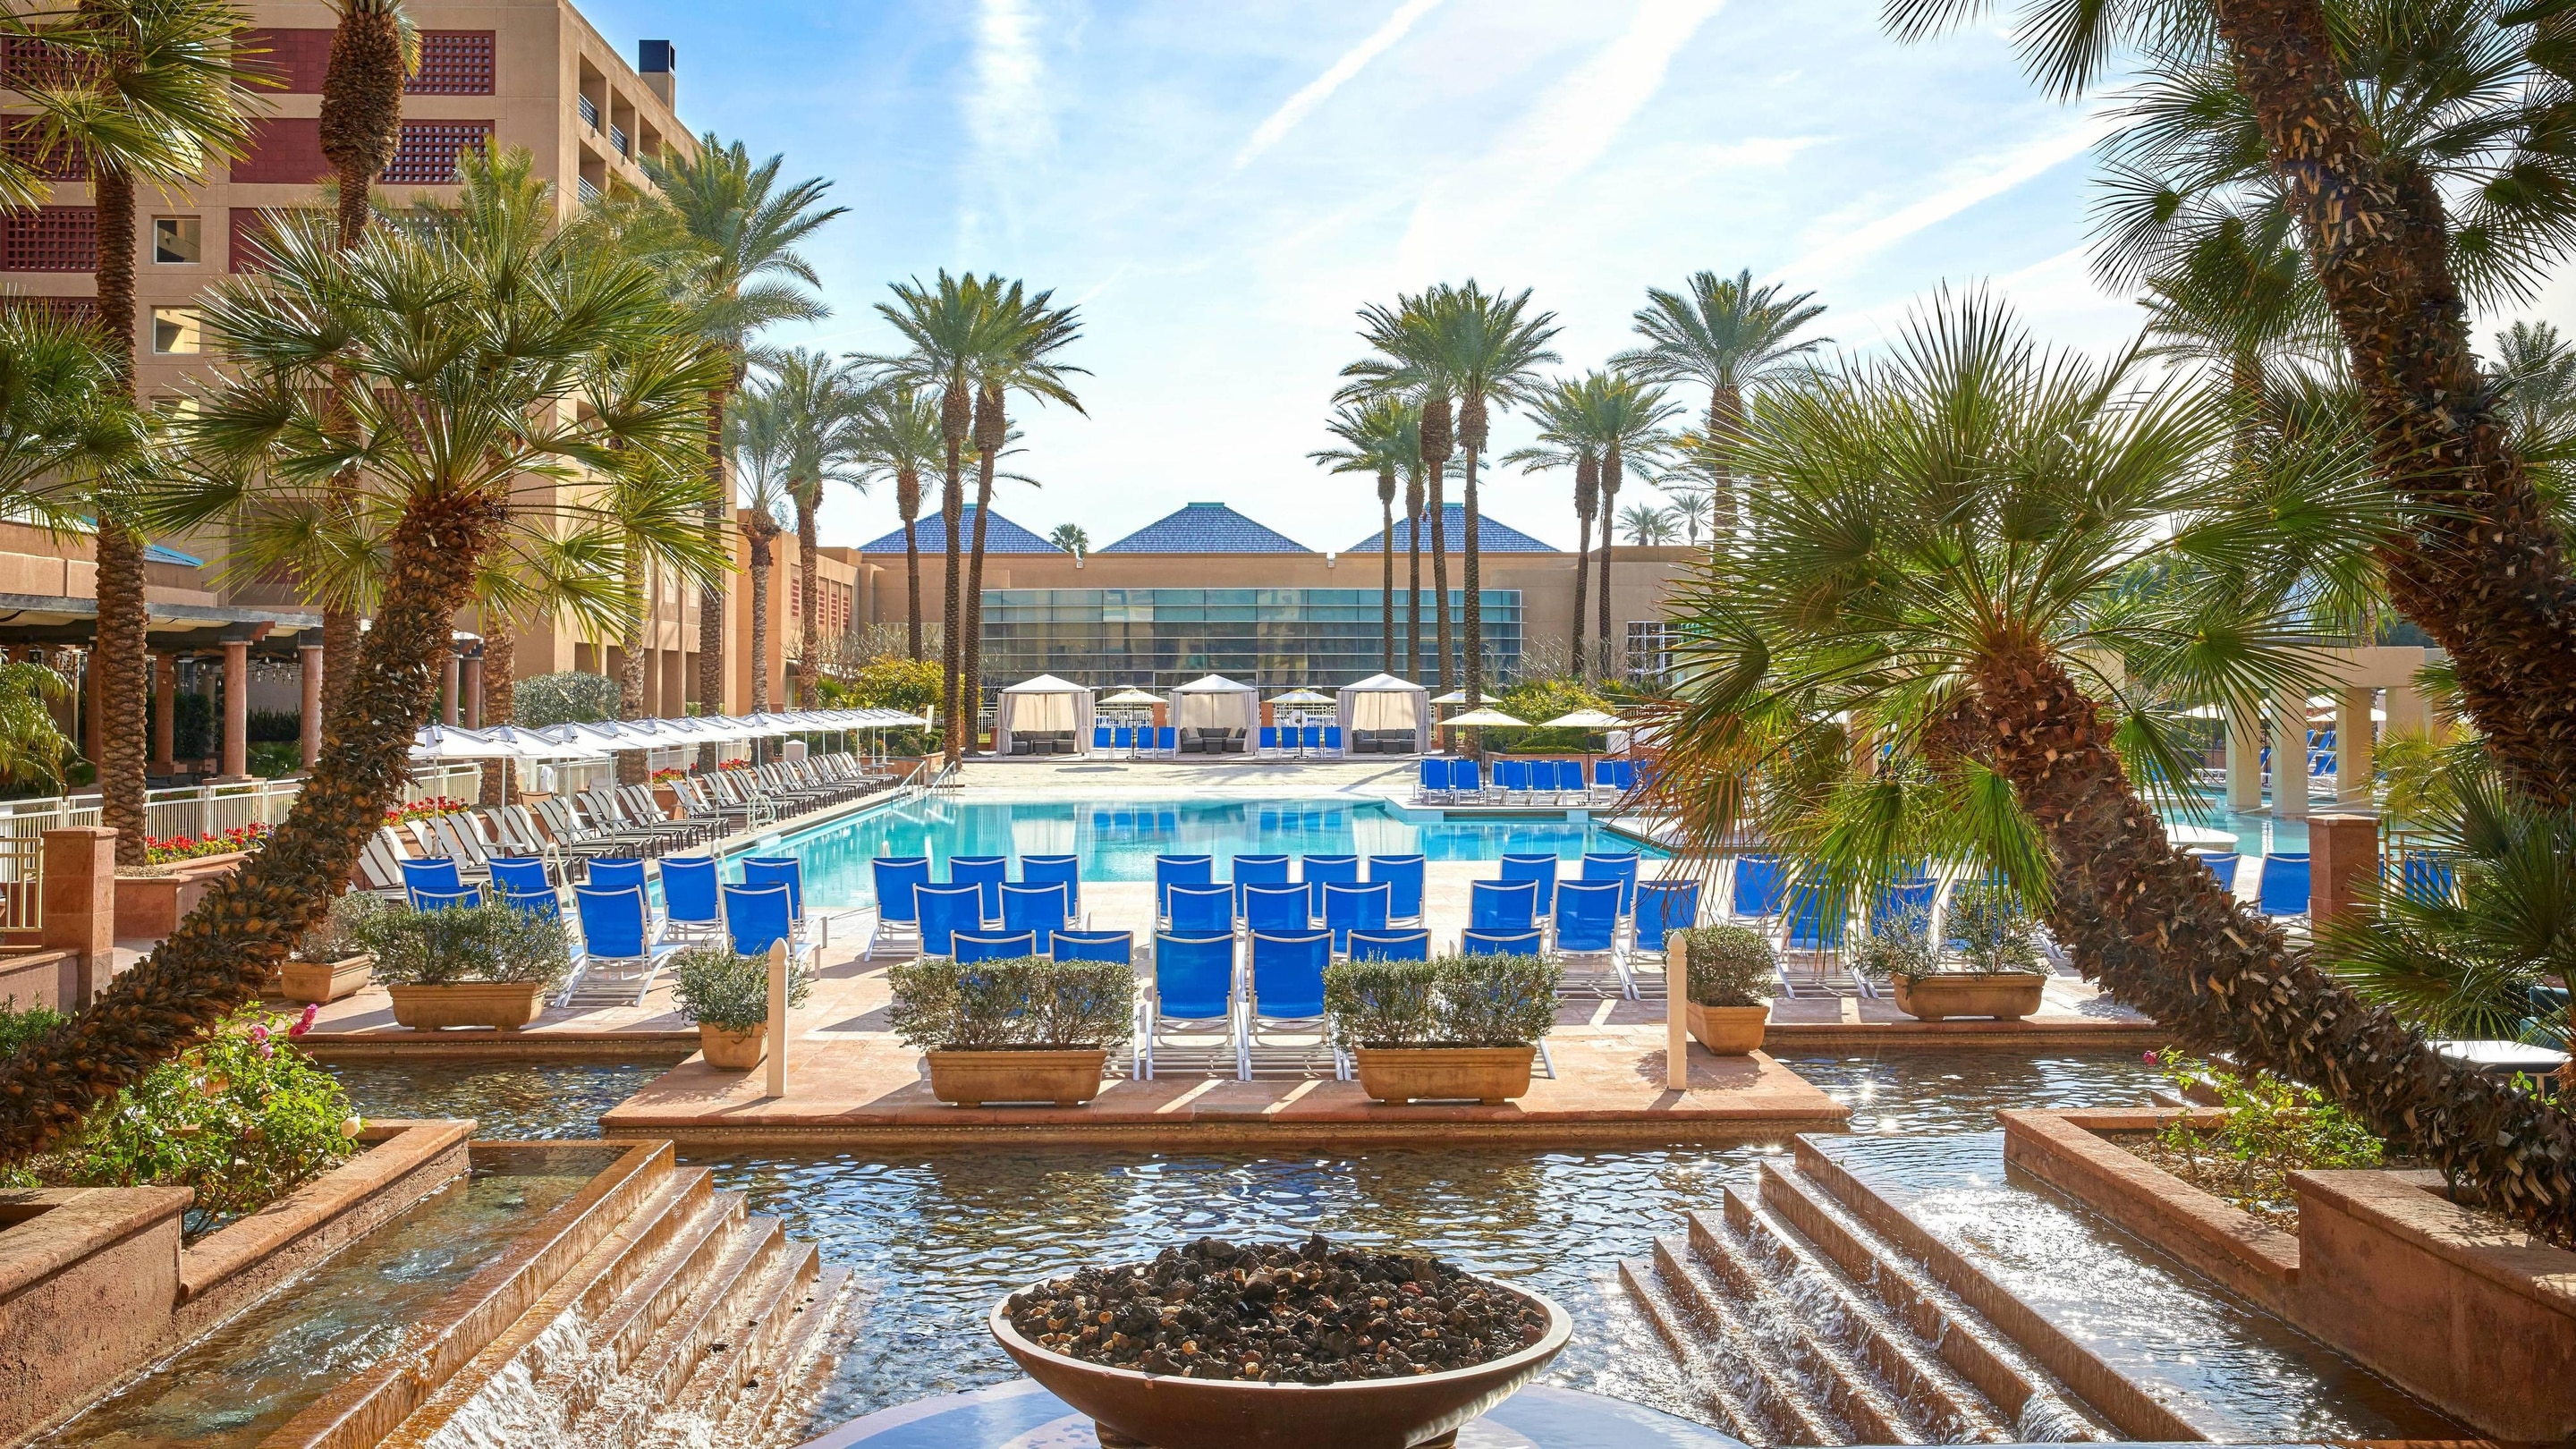 An expansive outdoor pool surrounded by palm trees and blue fabric chairs.